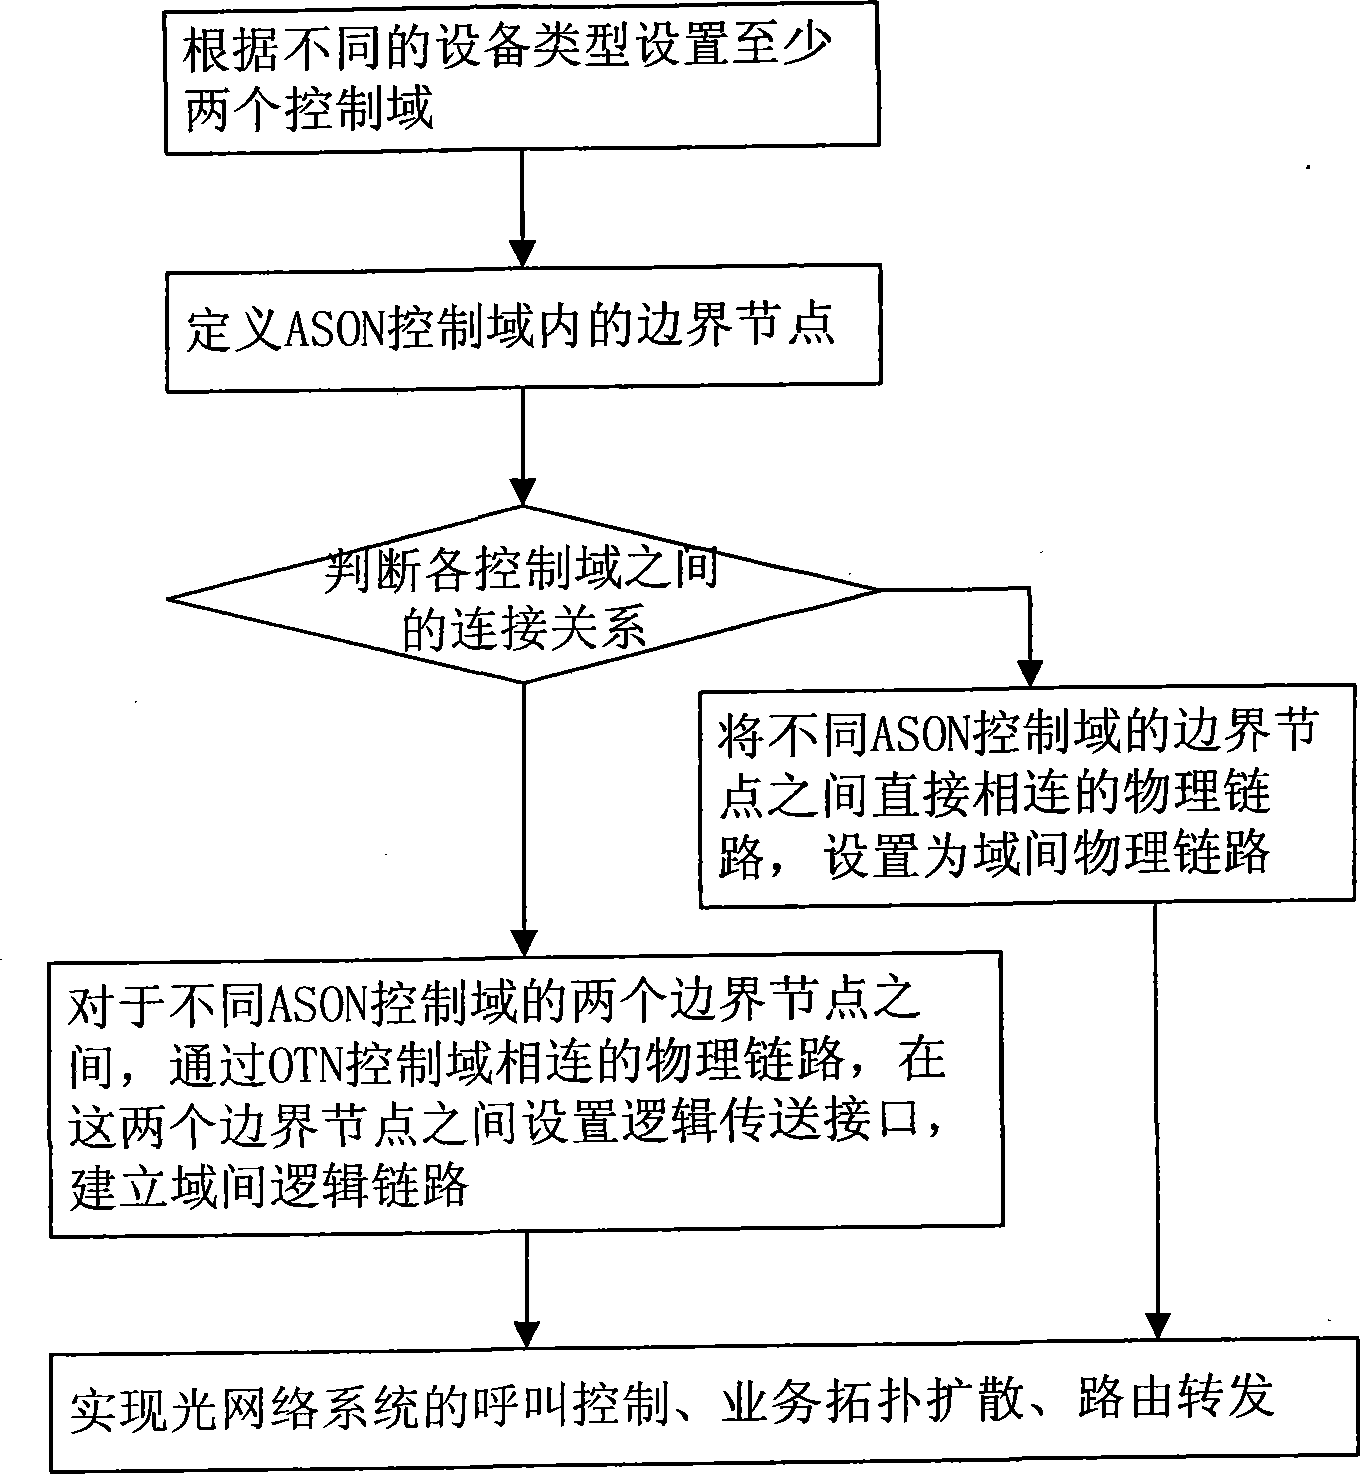 System and method for implementing terminal-to-terminal call connection between optical networks